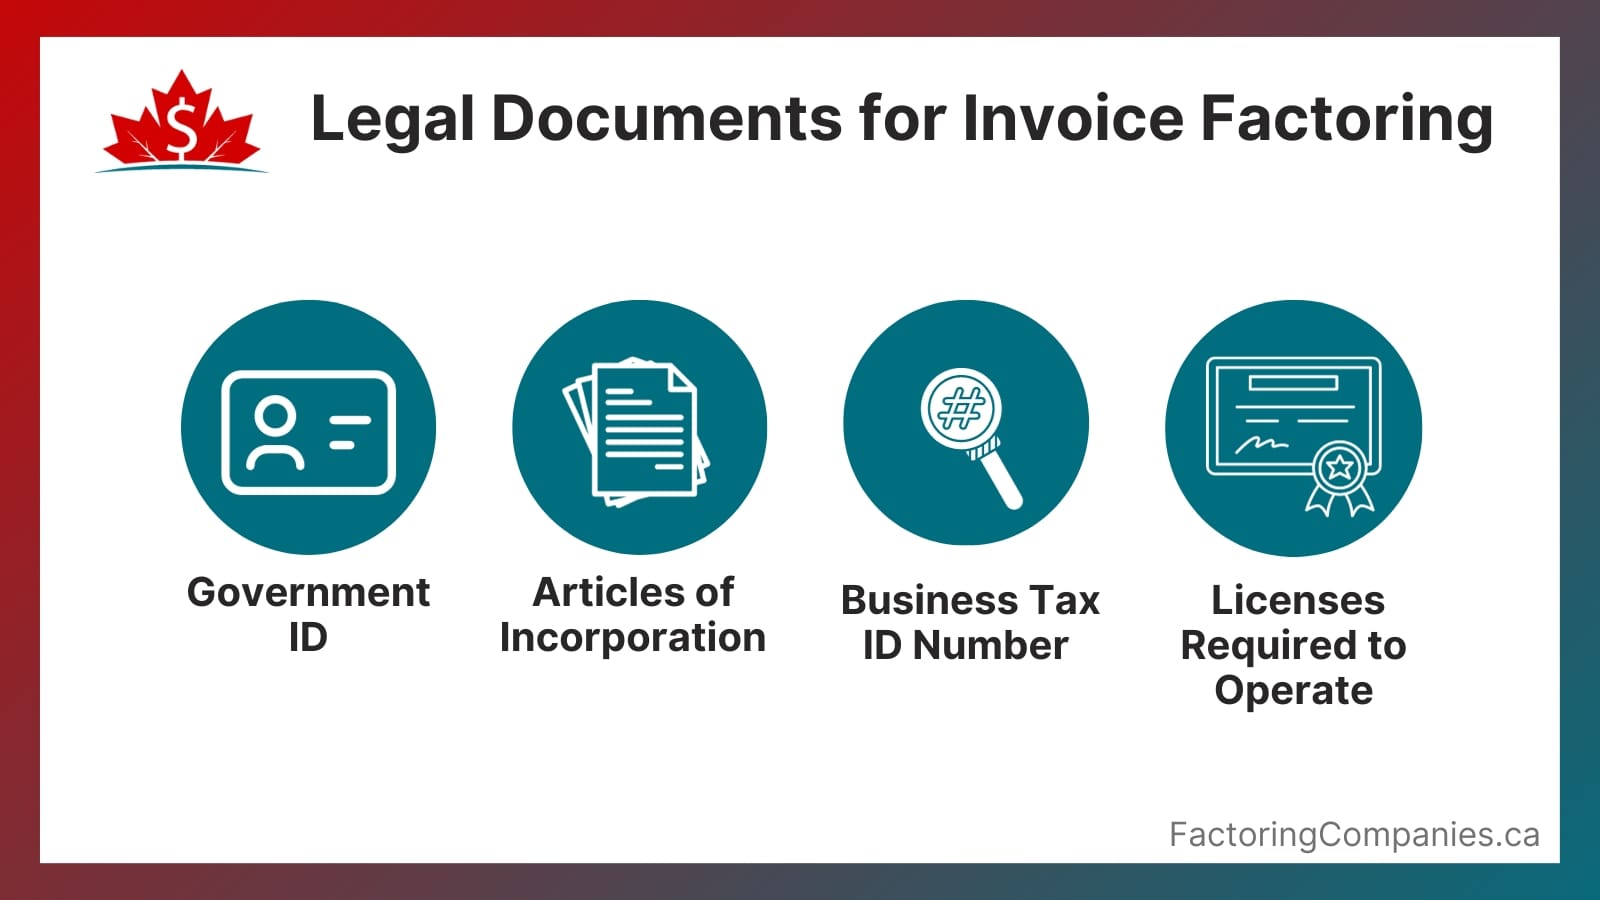 Legal Documents for Invoice Factoring